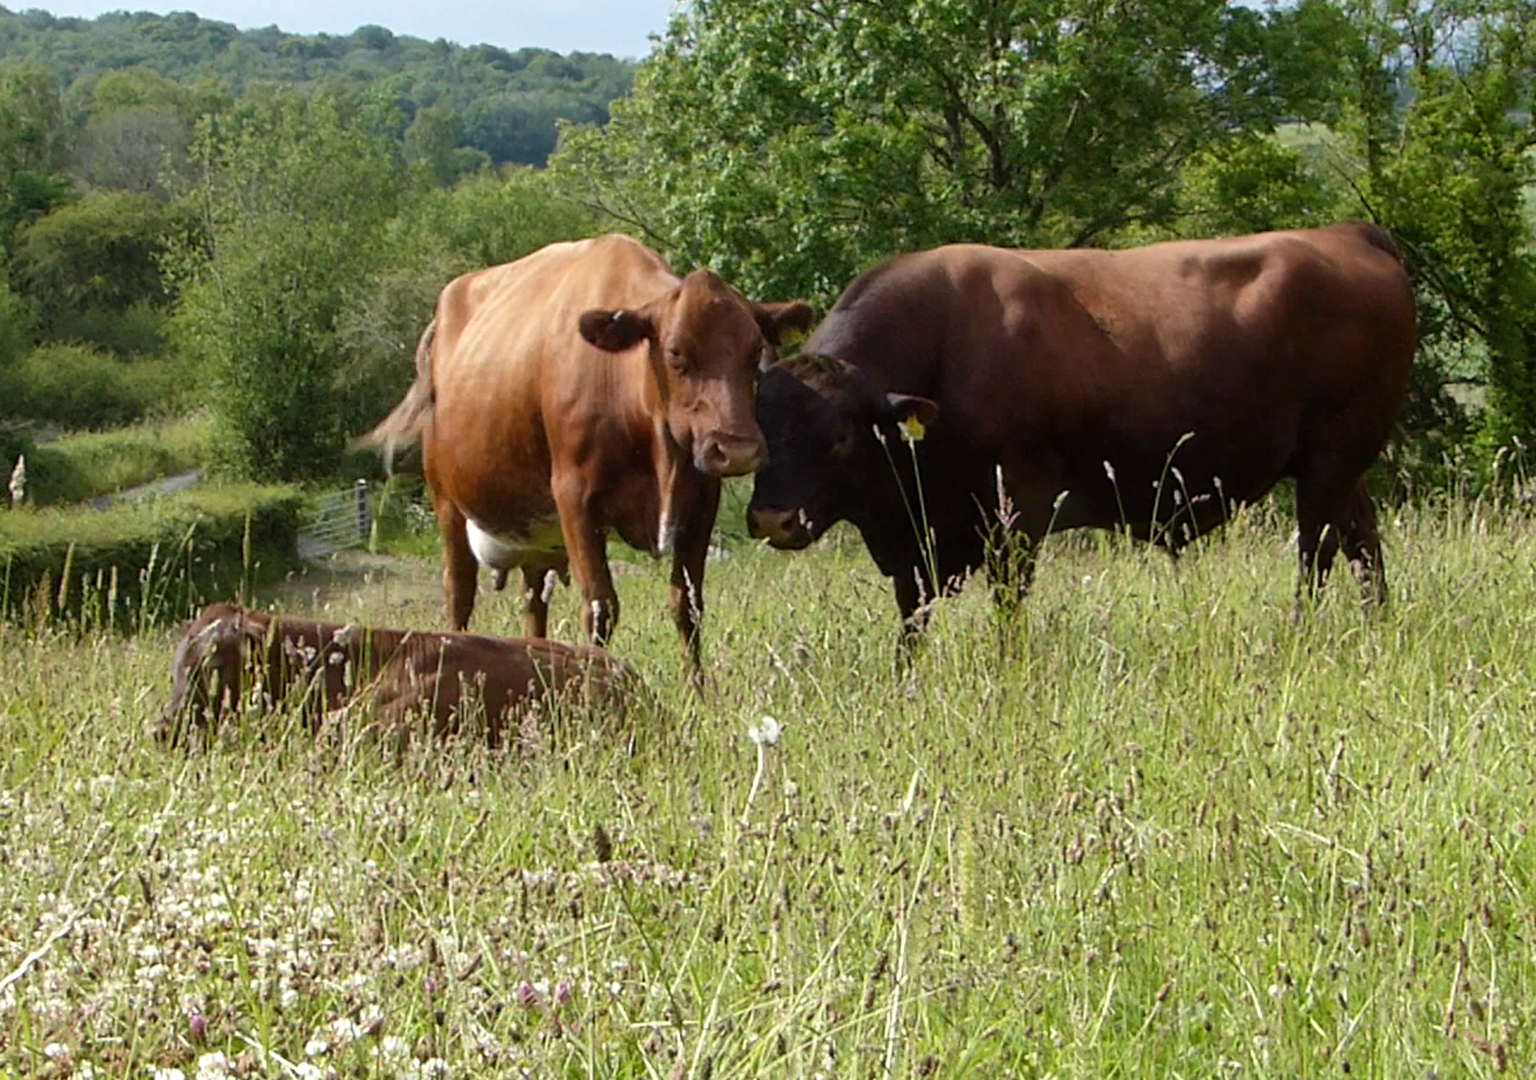 Cows in pasture at Arnside, Cumbria. Photo: Markus Wagner